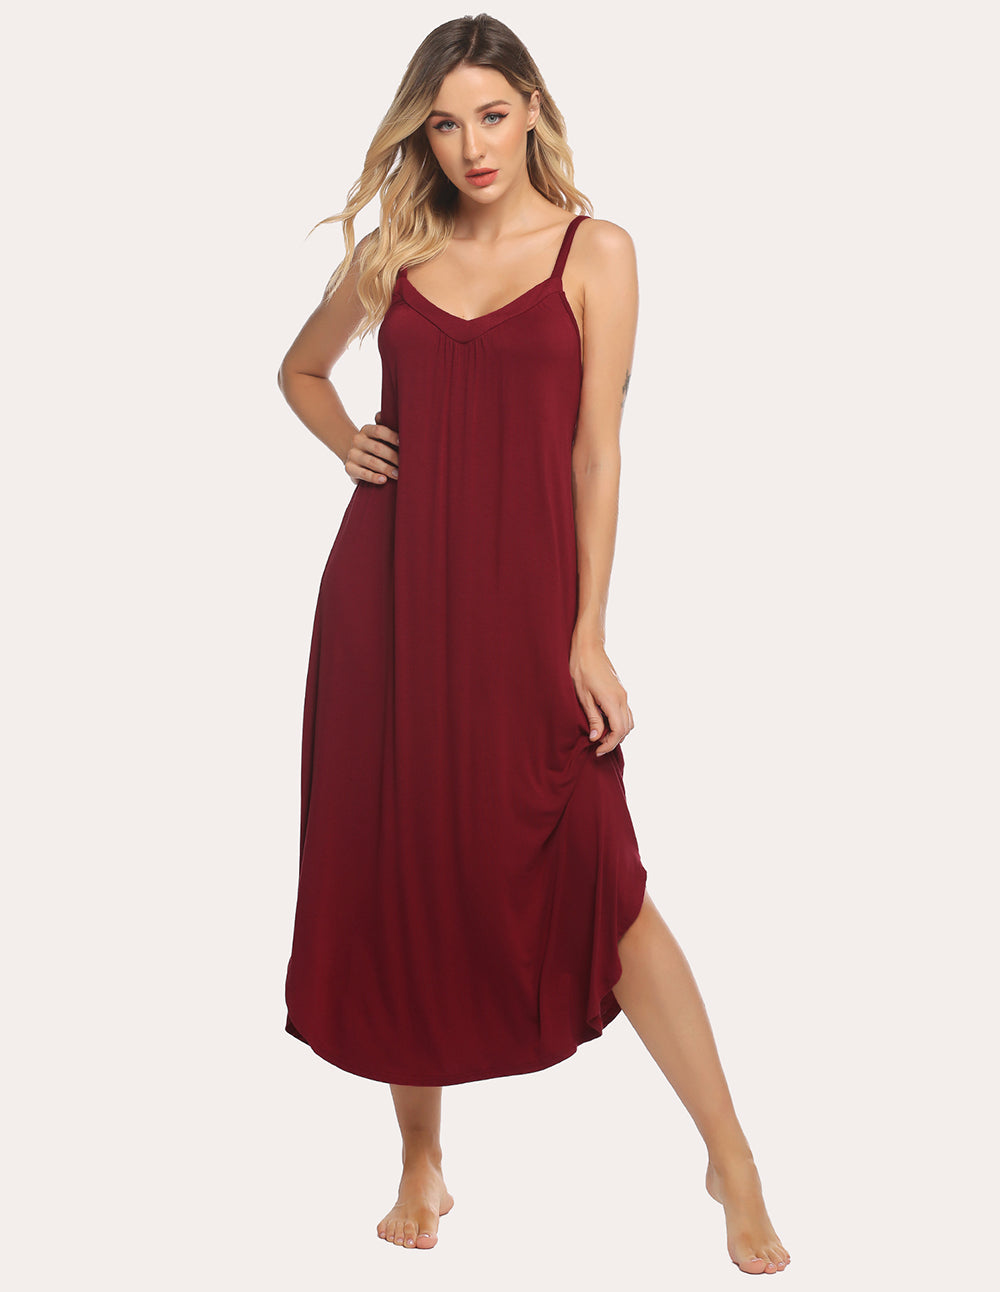 Ekouaer nightgown  sexy nightgowns for women